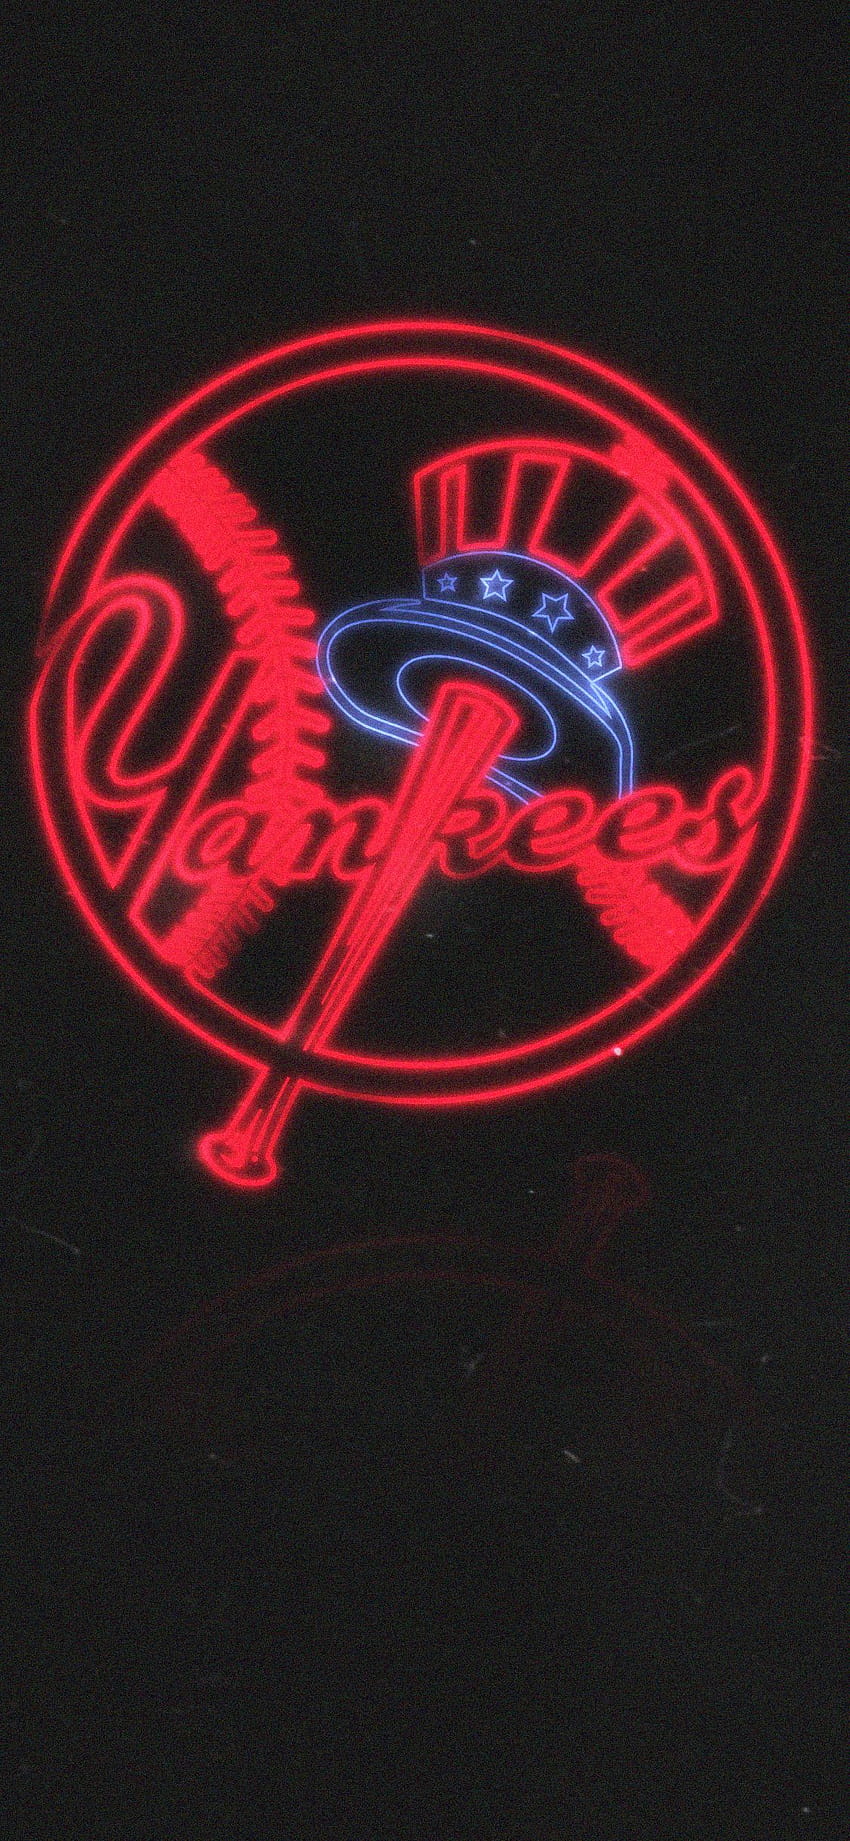 I made some Stranger Things inspired cellphone for my favorite sports teams. Go Yanks! : NYYankees HD phone wallpaper